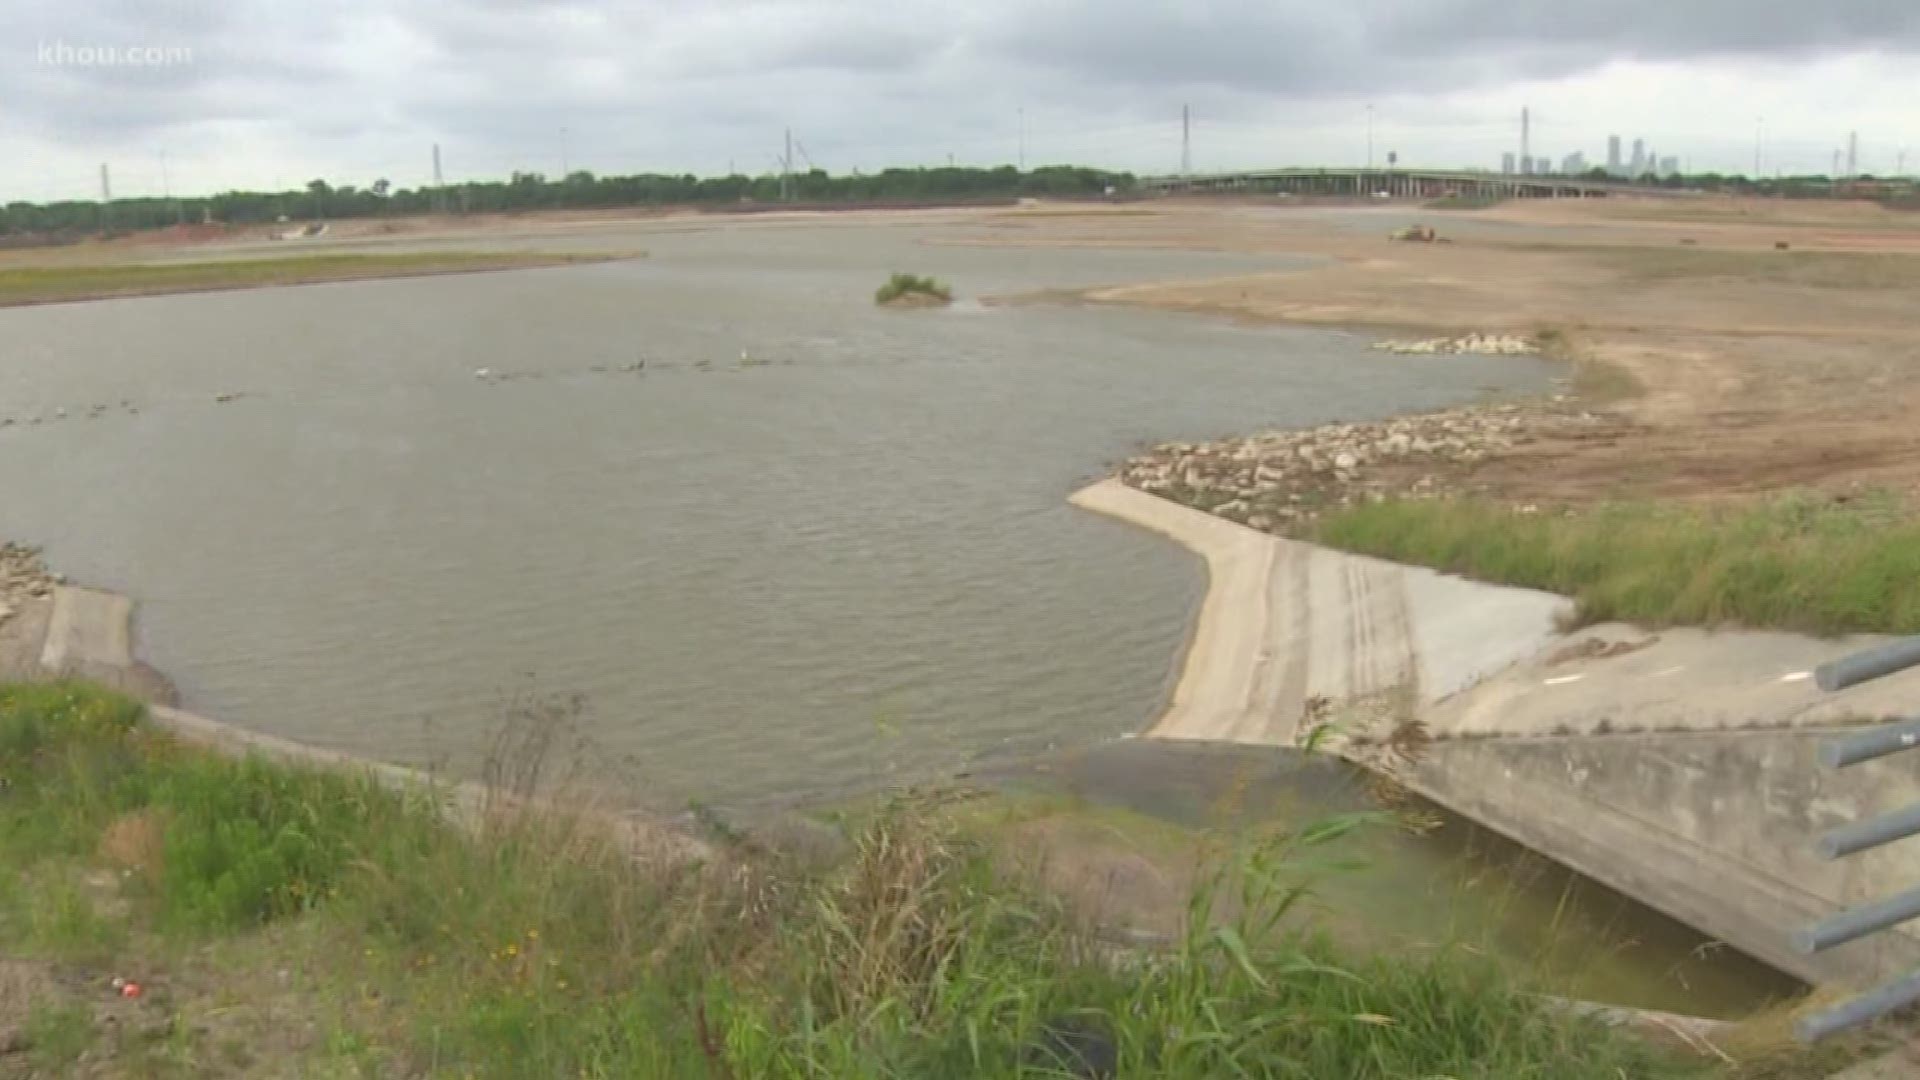 Just days away from the start of hurricane season, Harris County is wanting you to know they are doing everything they can to help Houston become more resilient when it comes to flooding. That includes the construction of a brand new detention pond.